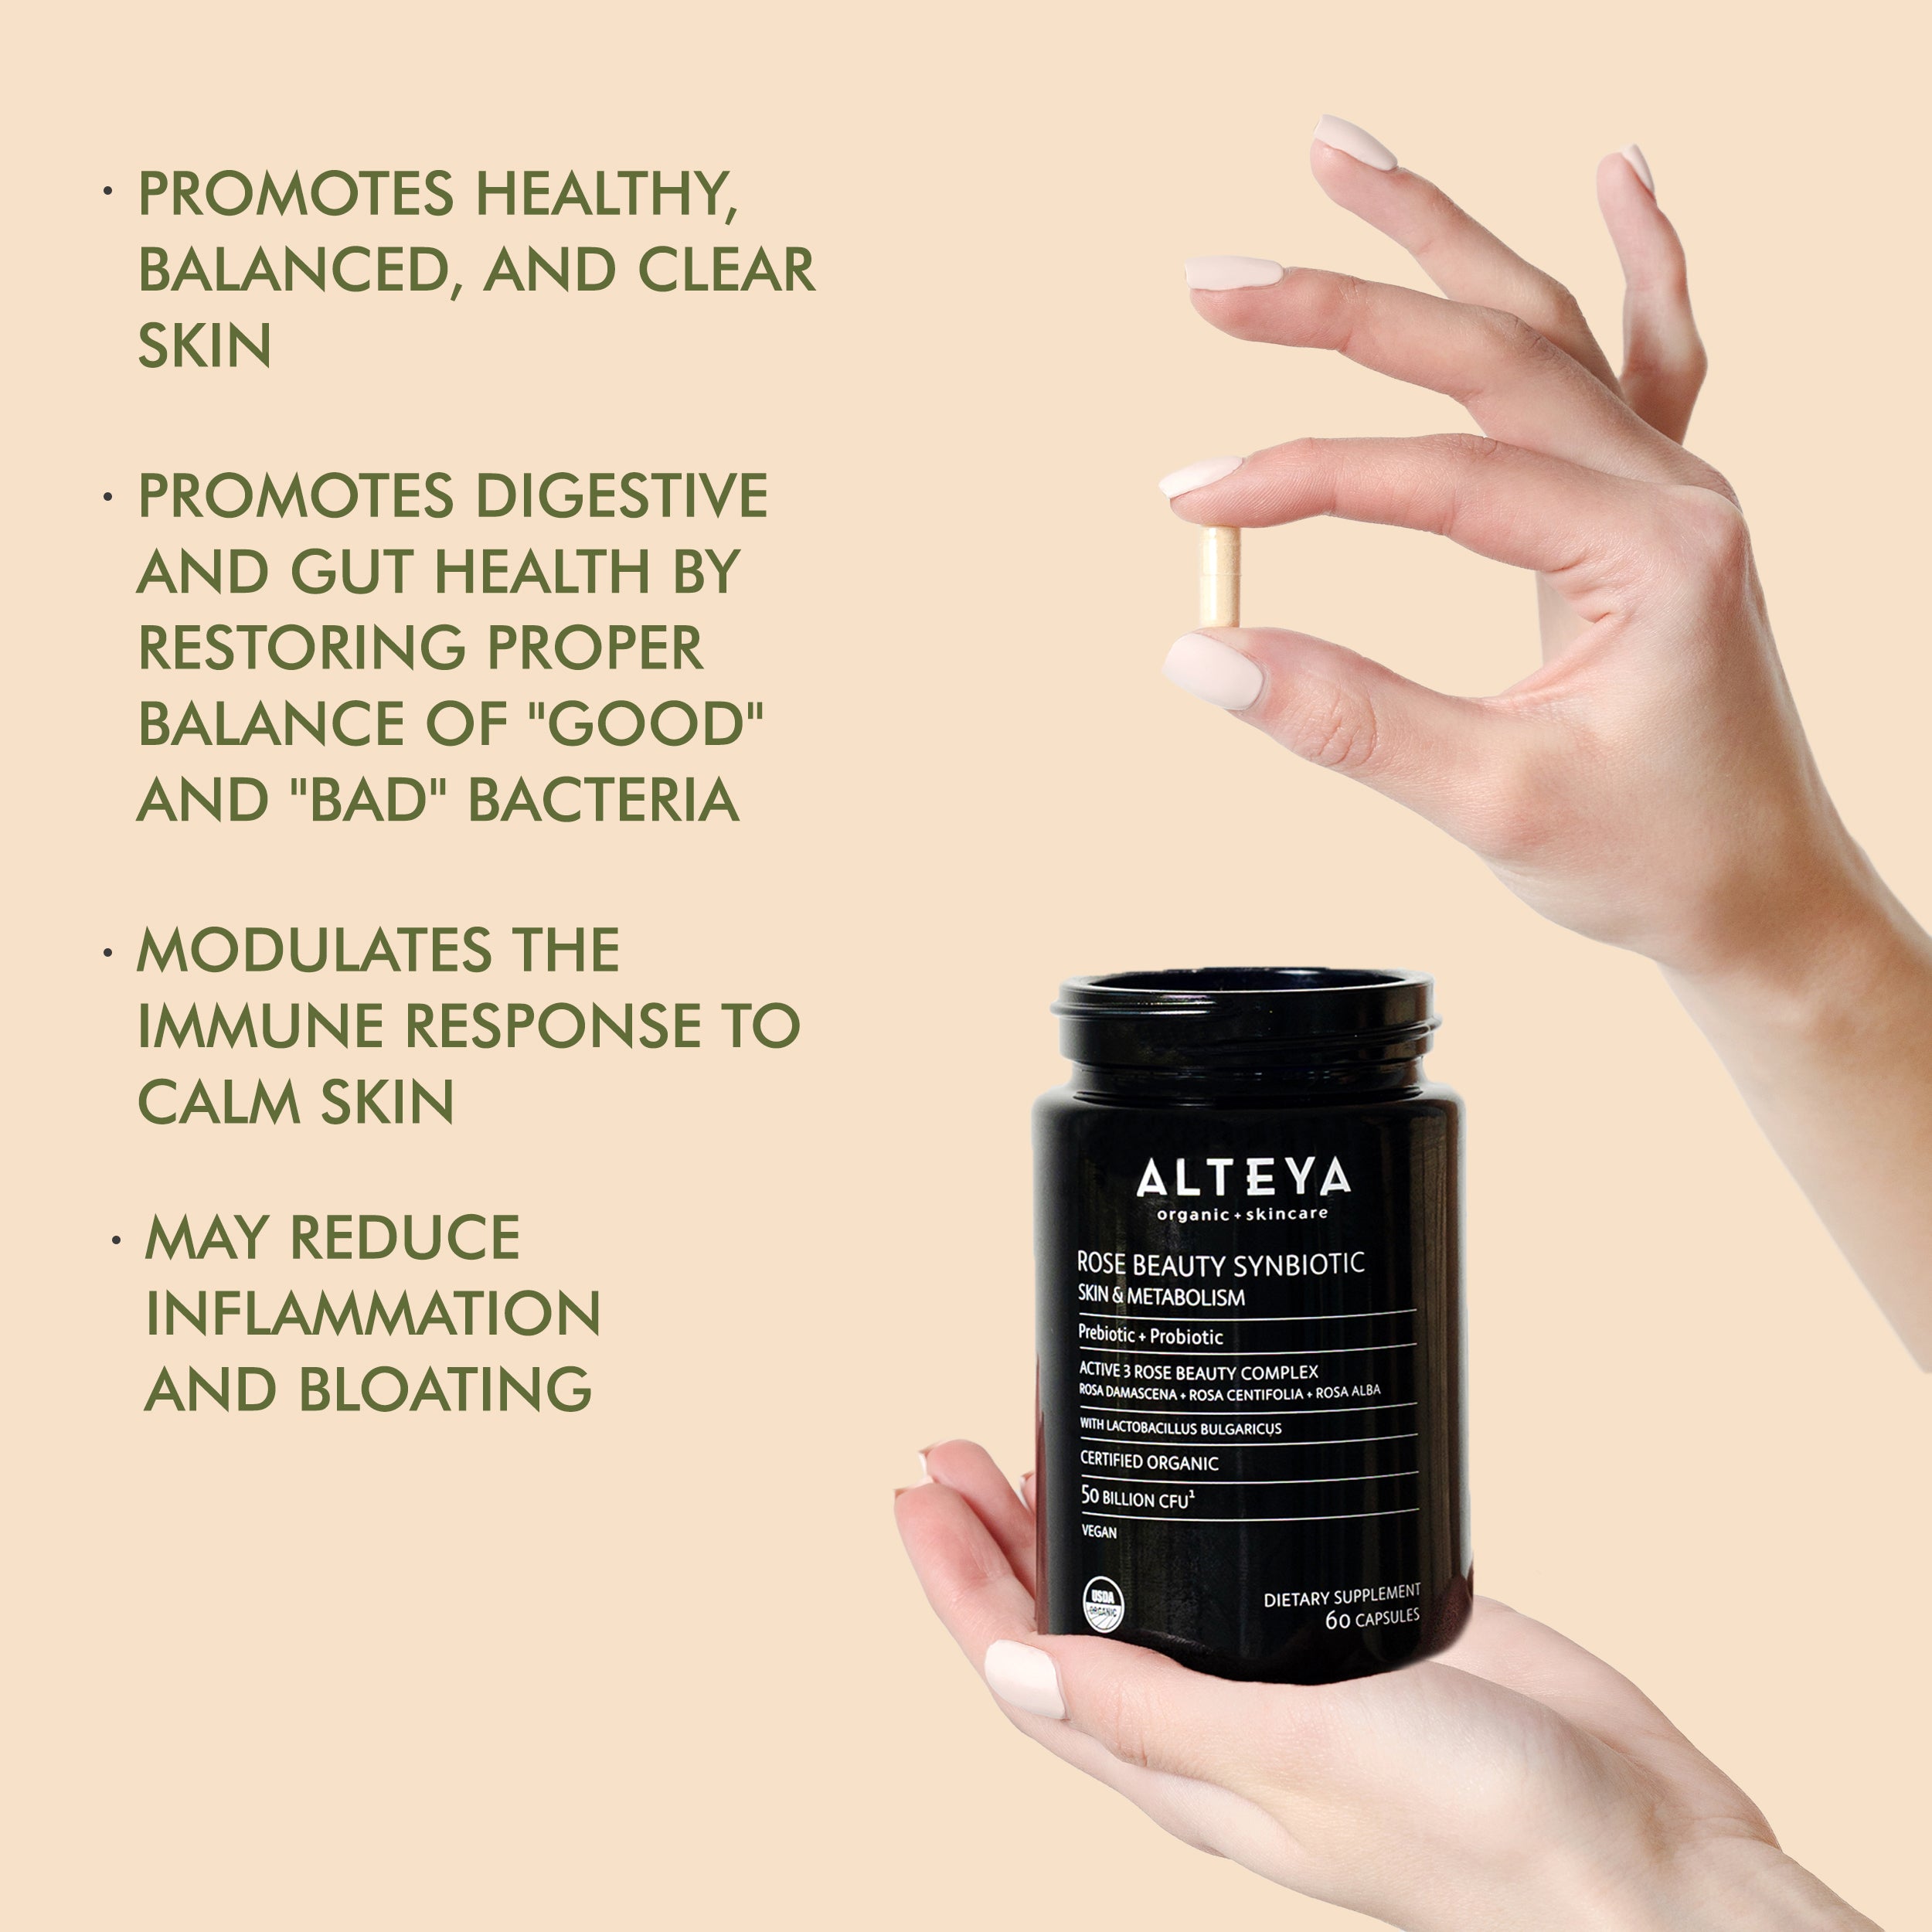 A hand holding a bottle of Rose Beauty Prebiotic and Probiotic - Synbiotic Skin & Metabolism Vegan Organic Supplement, a gut health probiotic by Alteya Organics.